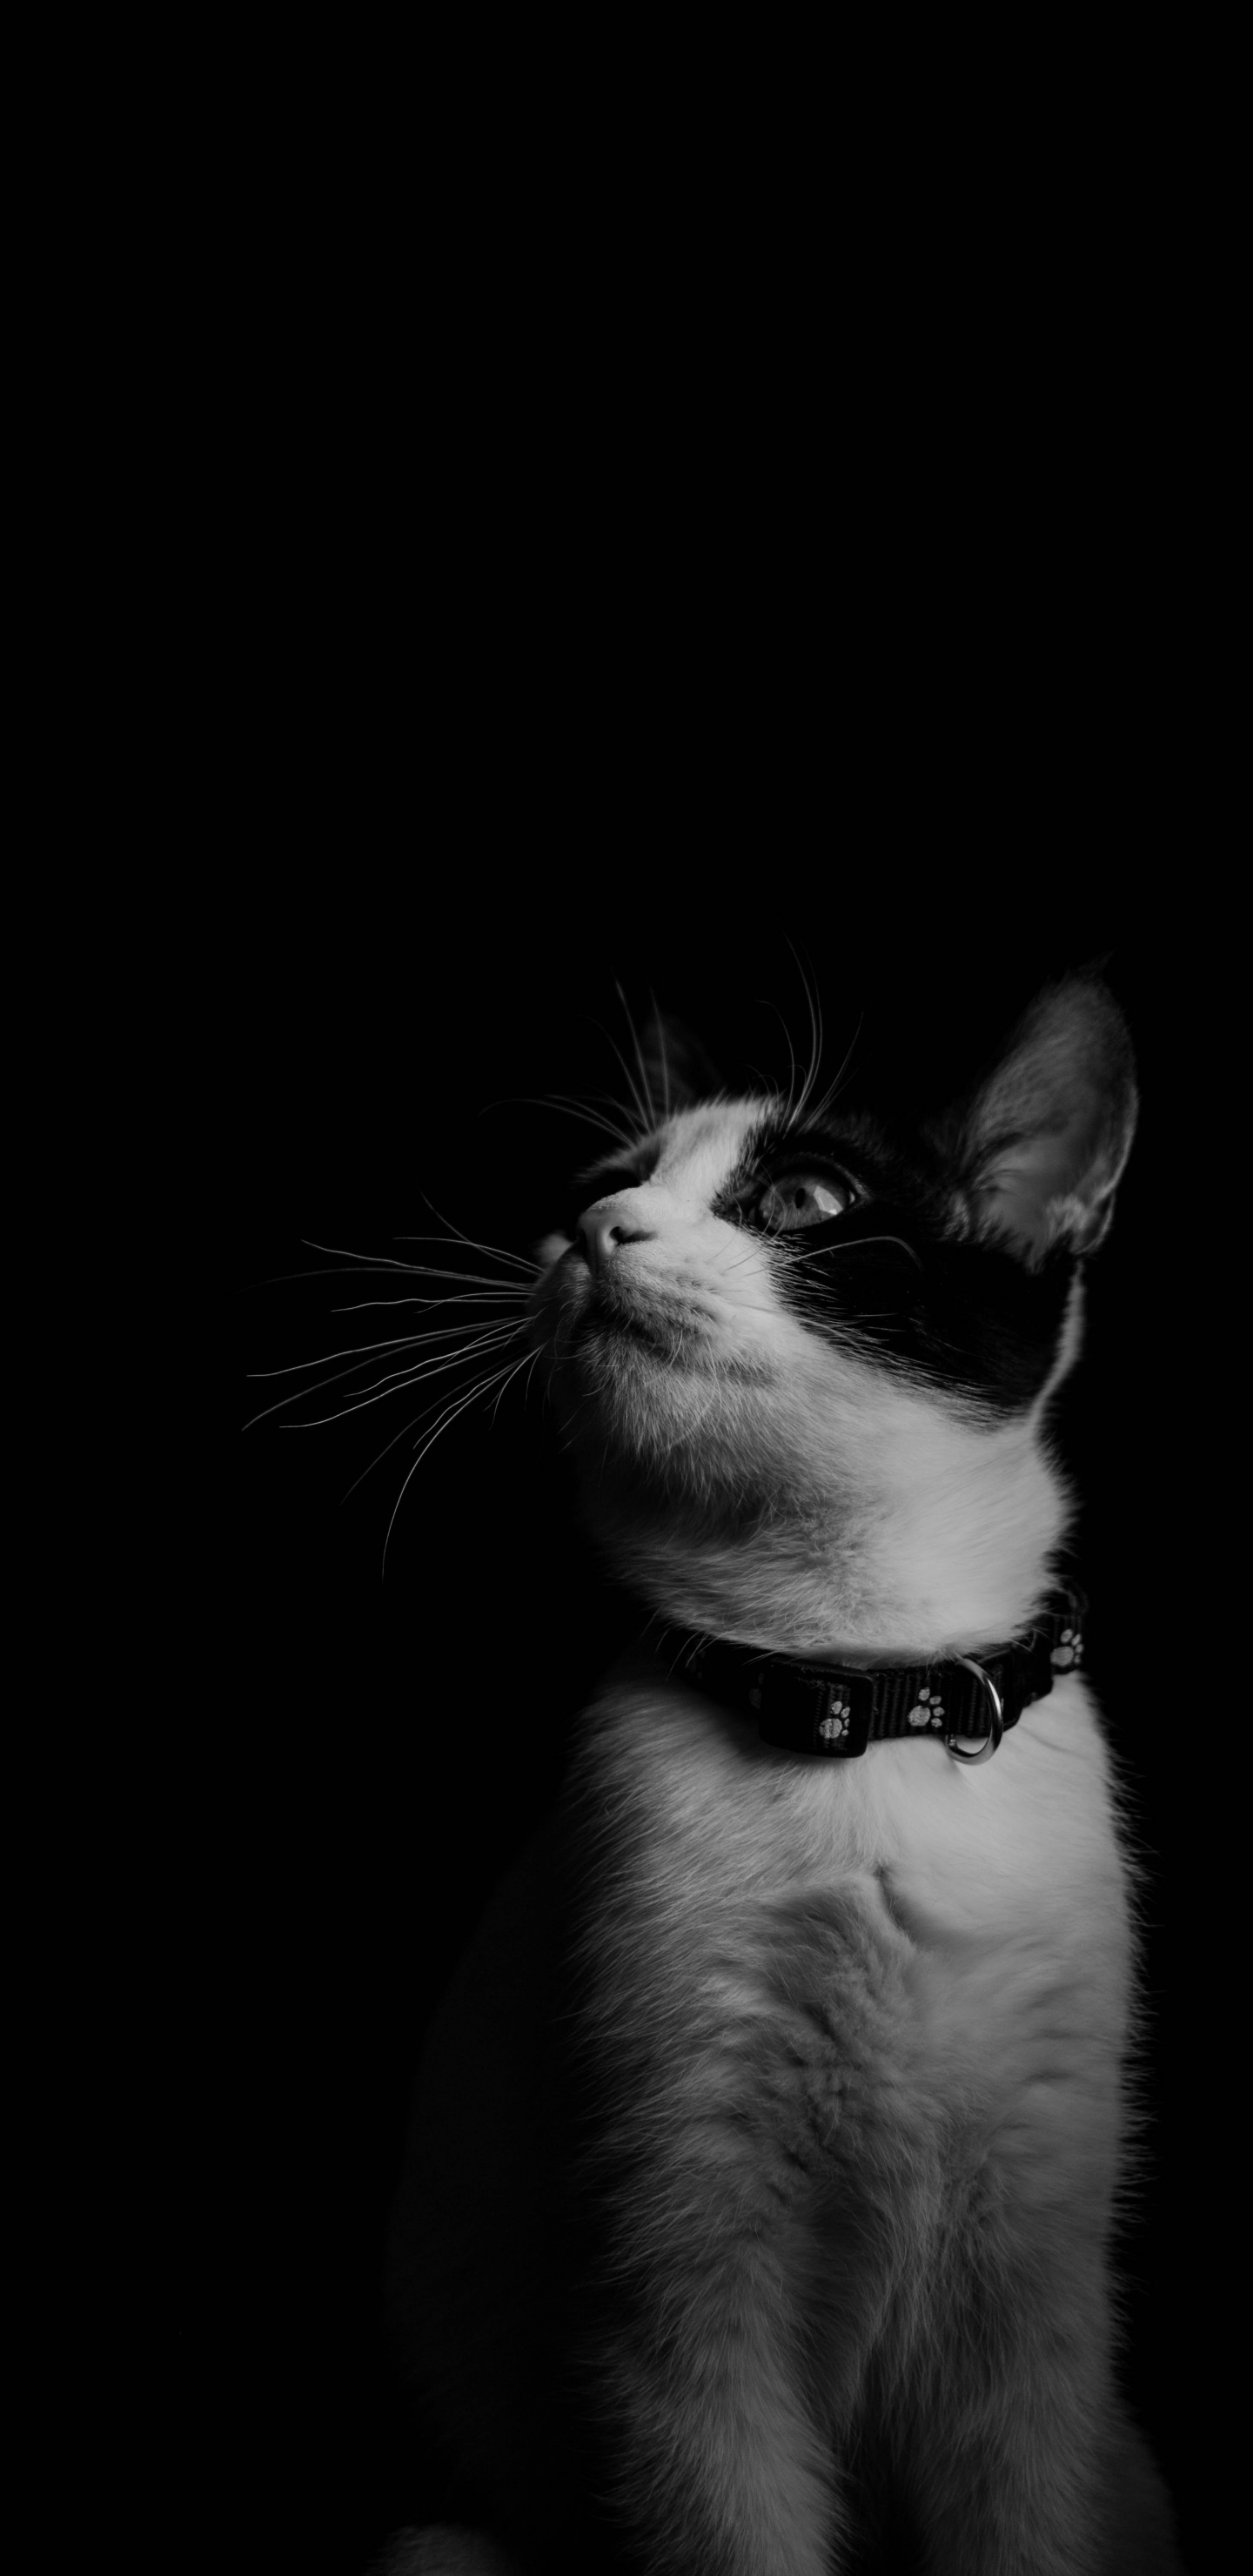 Grayscale Photo of Cat With Black Background. Wallpaper in 1440x2960 Resolution